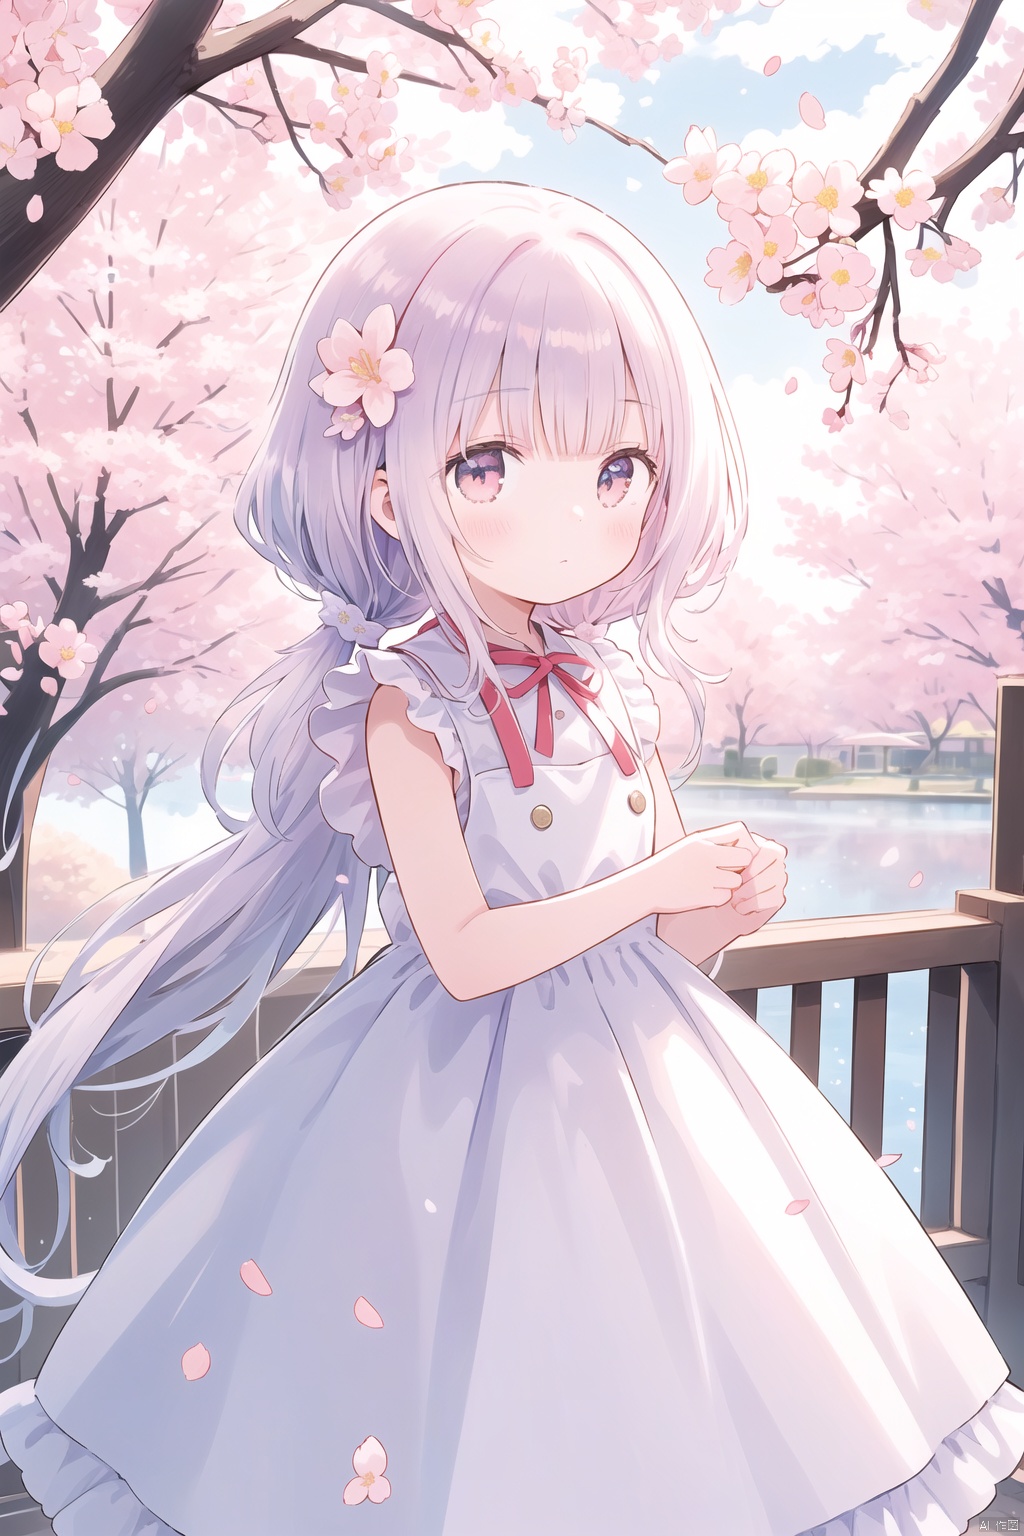 The image features a beautiful anime girl dressed in a flowing white and red dress, standing amidst a flurry of red cherry blossoms. The contrast between her white dress and the red flowers creates a striking visual effect. The lighting in the image is well-balanced, casting a warm glow on the girl and the surrounding flowers. The colors are vibrant and vivid, with the red cherry blossoms standing out against the white sky. The overall style of the image is dreamy and romantic, perfect for a piece of anime artwork. The quality of the image is excellent, with clear details and sharp focus. The girl's dress and the flowers are well-defined, and the background is evenly lit, without any harsh shadows or glare. From a technical standpoint, the image is well-composed, with the girl standing in the center of the frame, surrounded by the blossoms. The use of negative space in the background helps to draw the viewer's attention to the girl and the flowers. The cherry blossoms, often associated with transience and beauty, further reinforce this theme. The girl, lost in her thoughts, seems to be contemplating the fleeting nature of beauty and the passage of time. Overall, this is an impressive image that showcases the photographer's skill in capturing the essence of a scene, as well as their ability to create a compelling narrative through their art.catgirl,loli